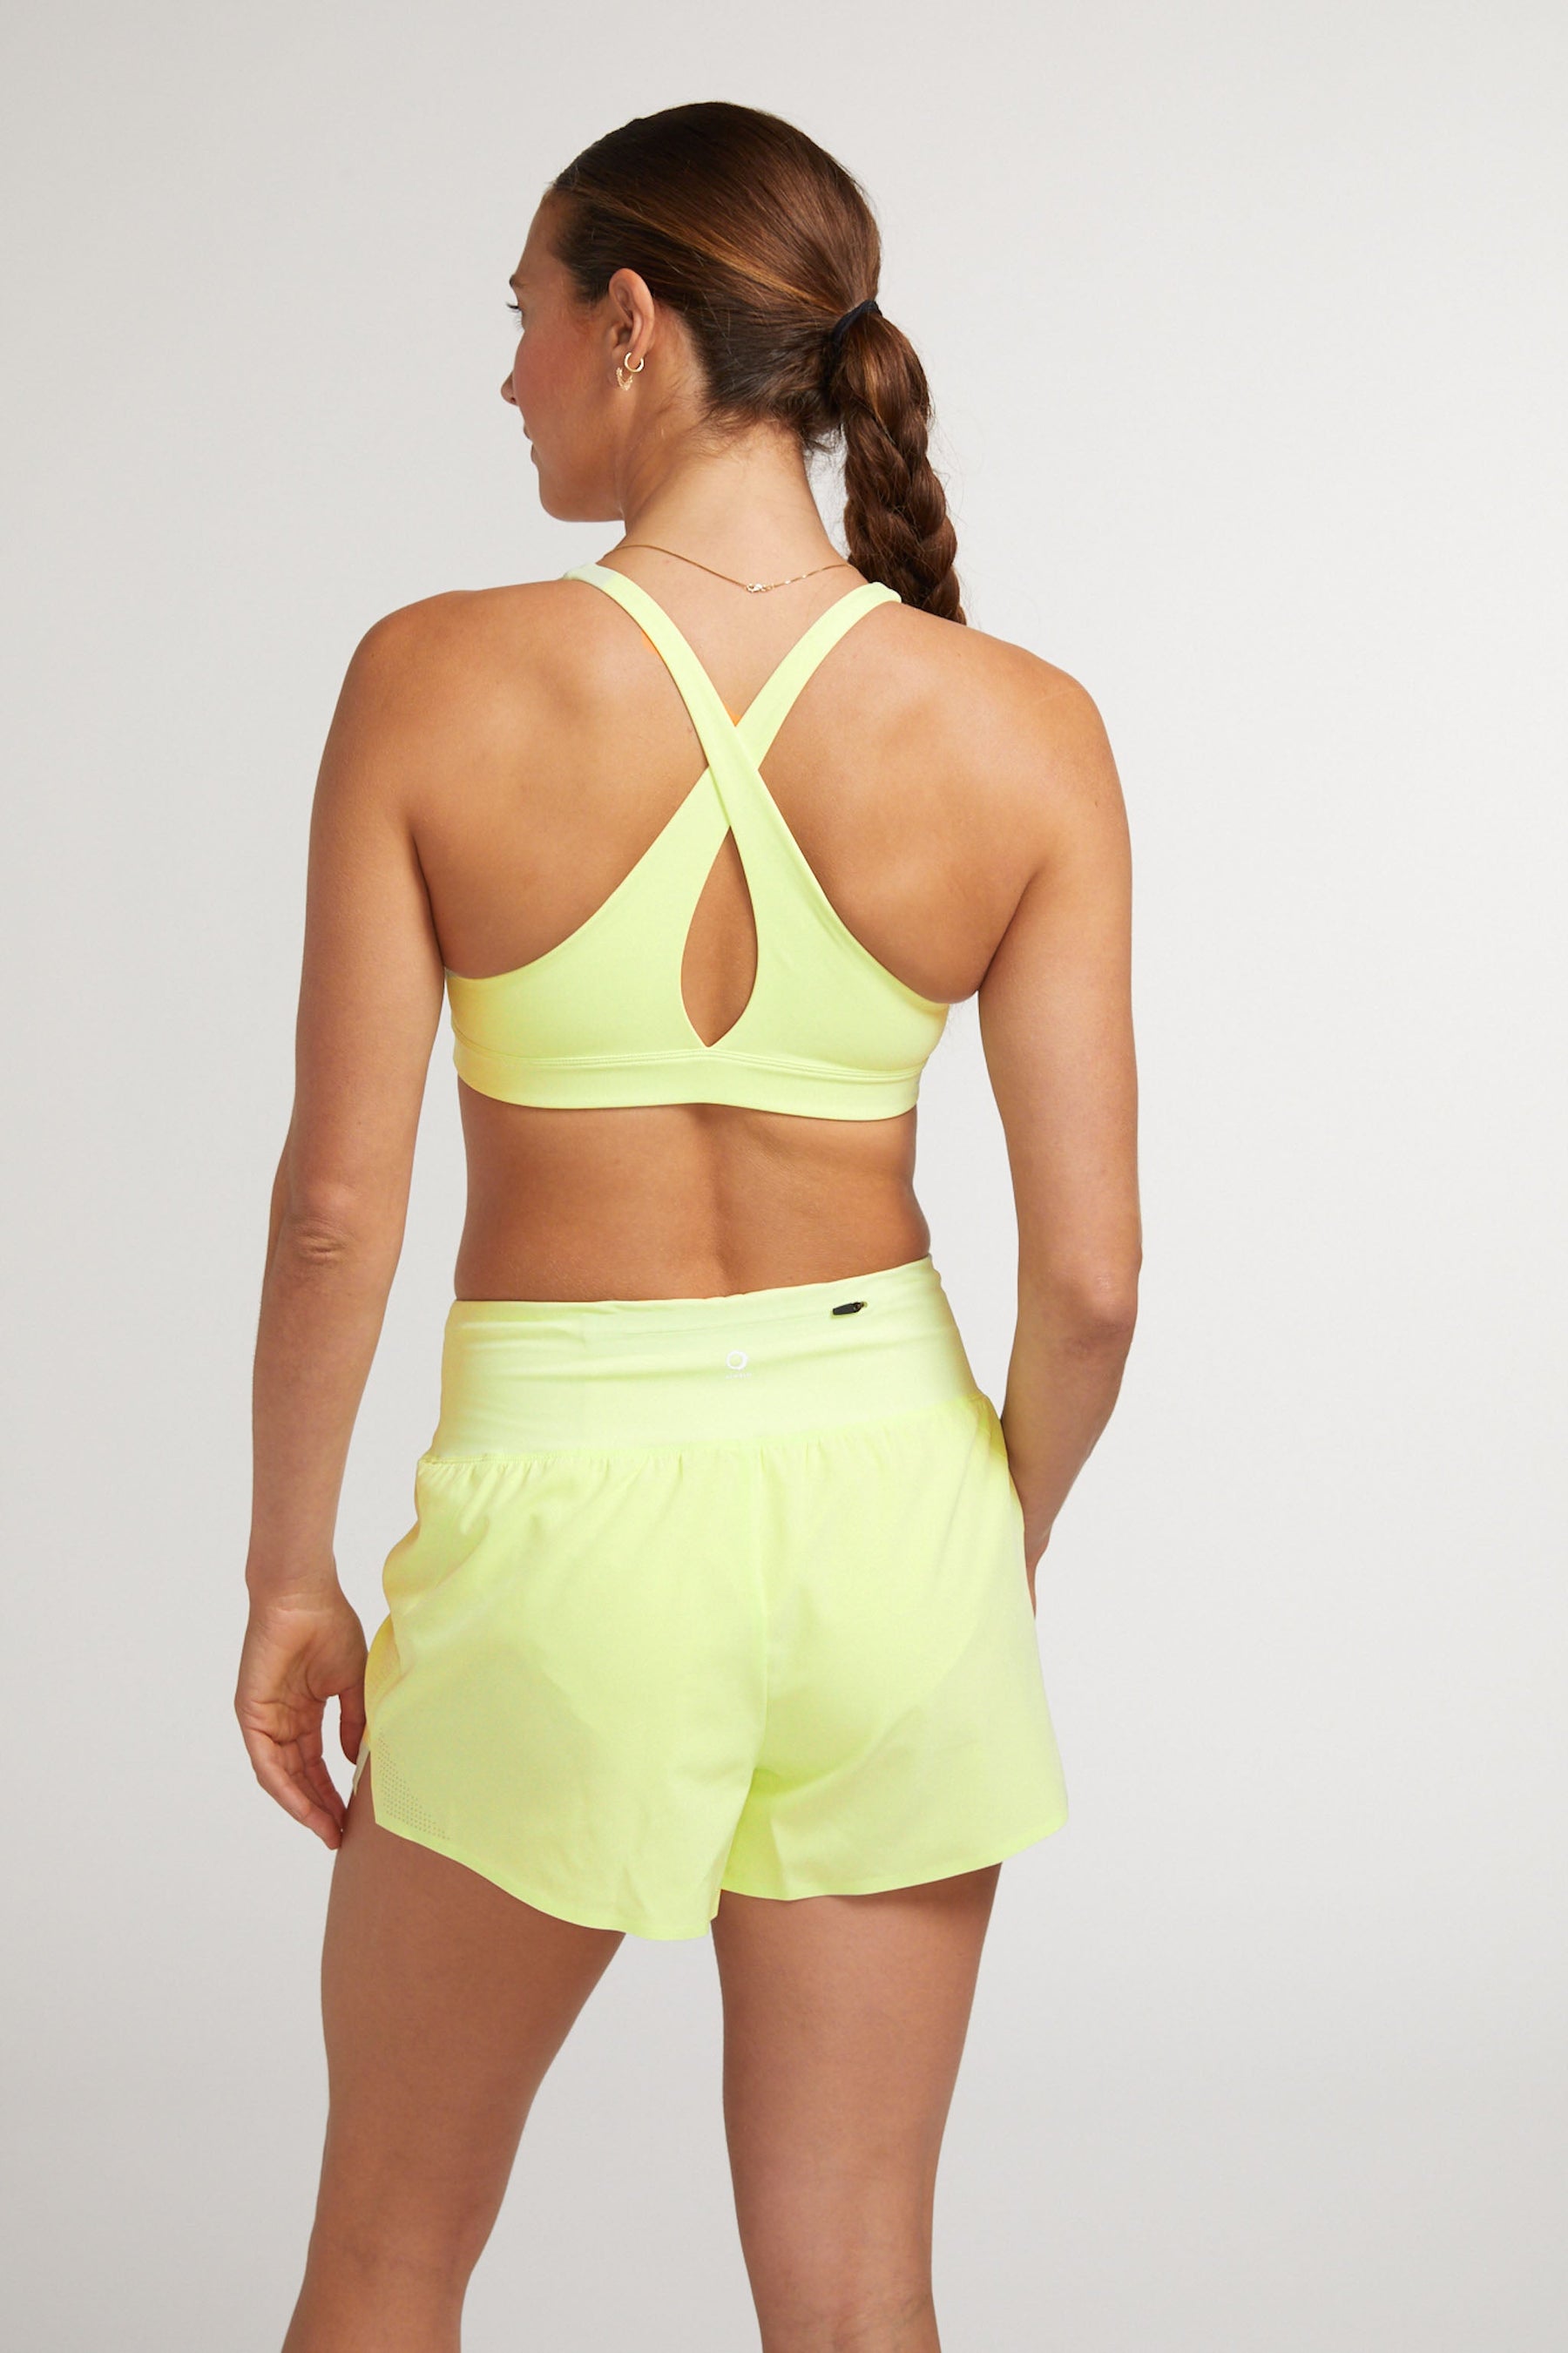 Breathable sports bra sustainably produced 